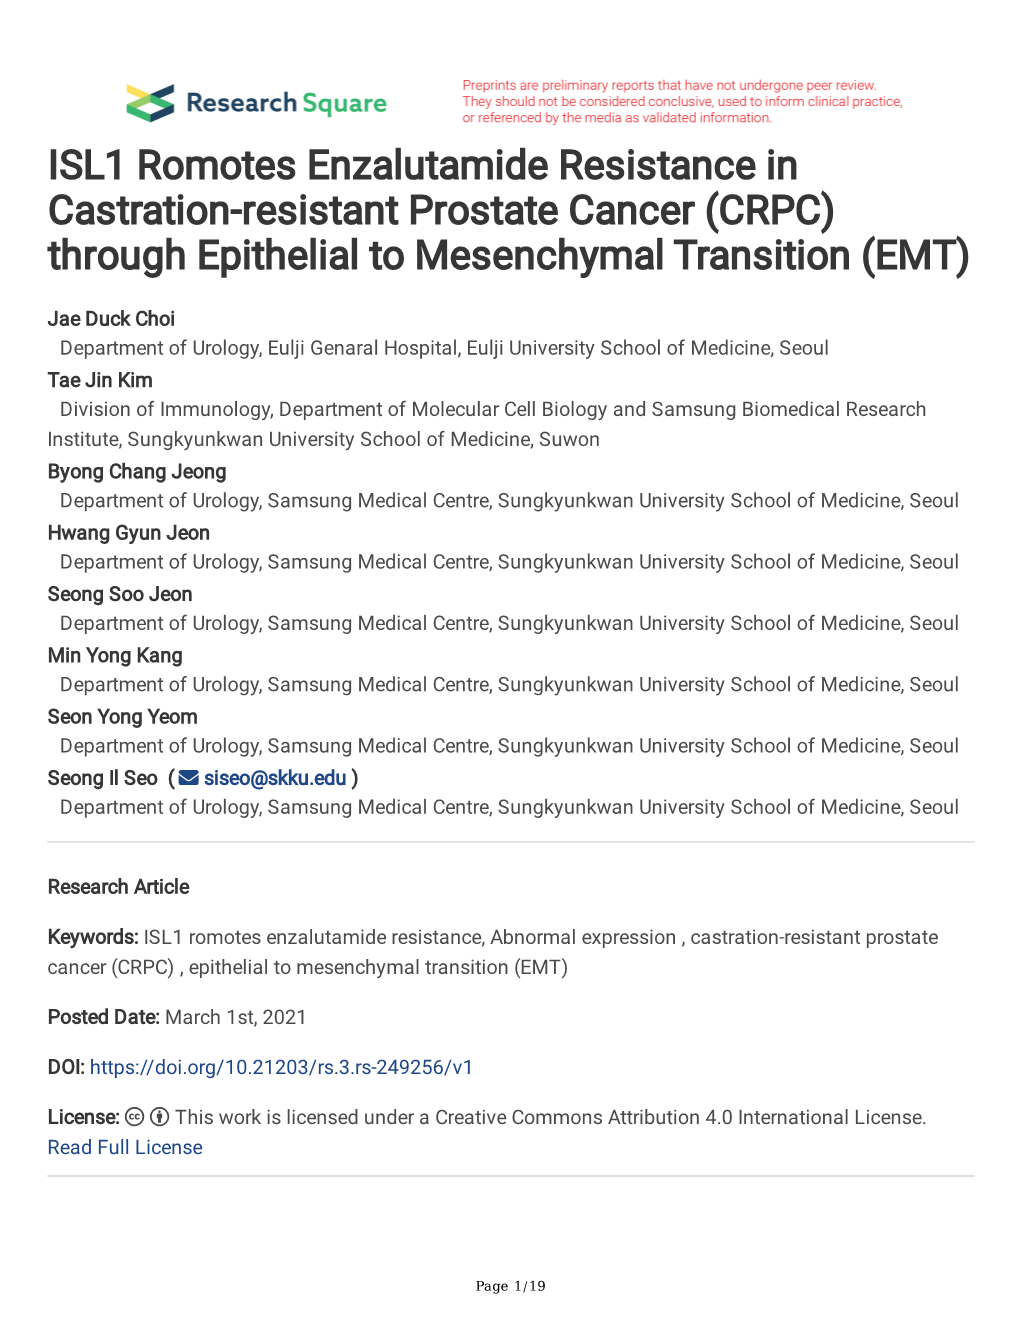 ISL1 Romotes Enzalutamide Resistance in Castration-Resistant Prostate Cancer (CRPC) Through Epithelial to Mesenchymal Transition (EMT)